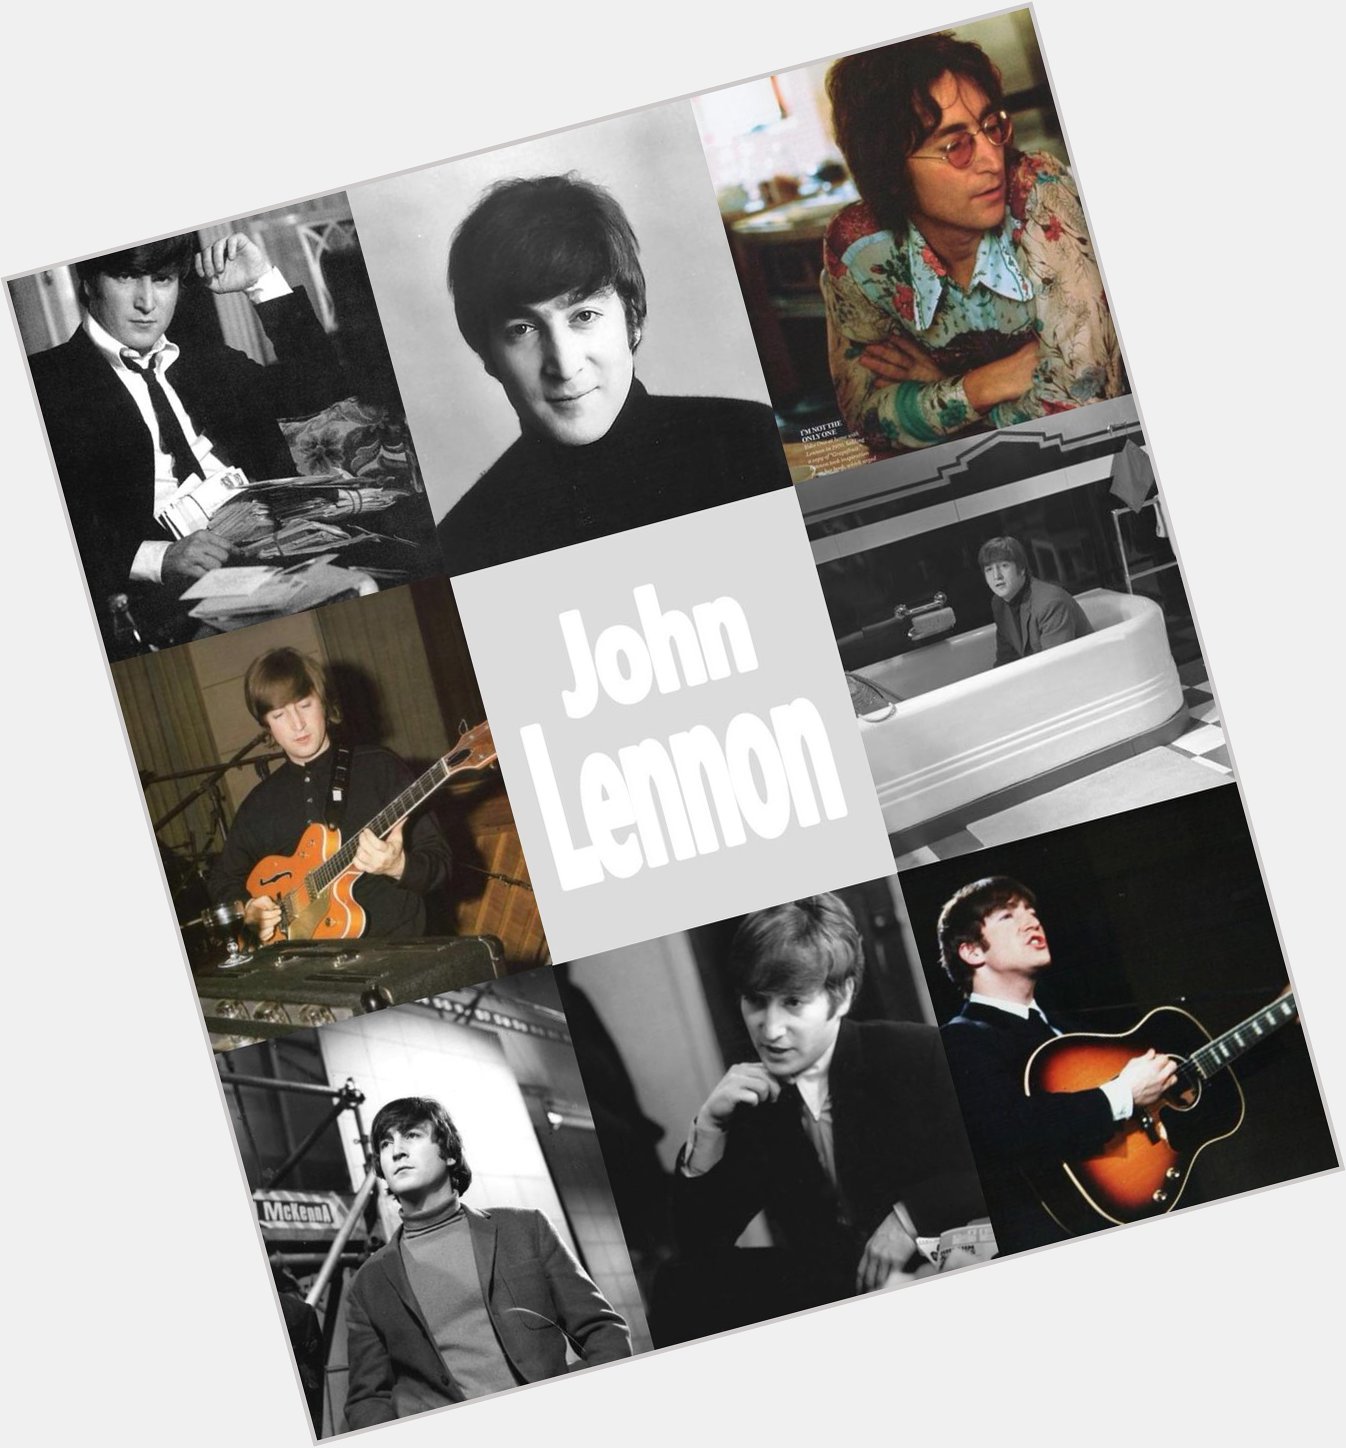 Happy Birthday John Lennon! Luv u and Miiss You! We lost you way too soon with the Shot Heard\" \CROSS THE UNIVERSE! 